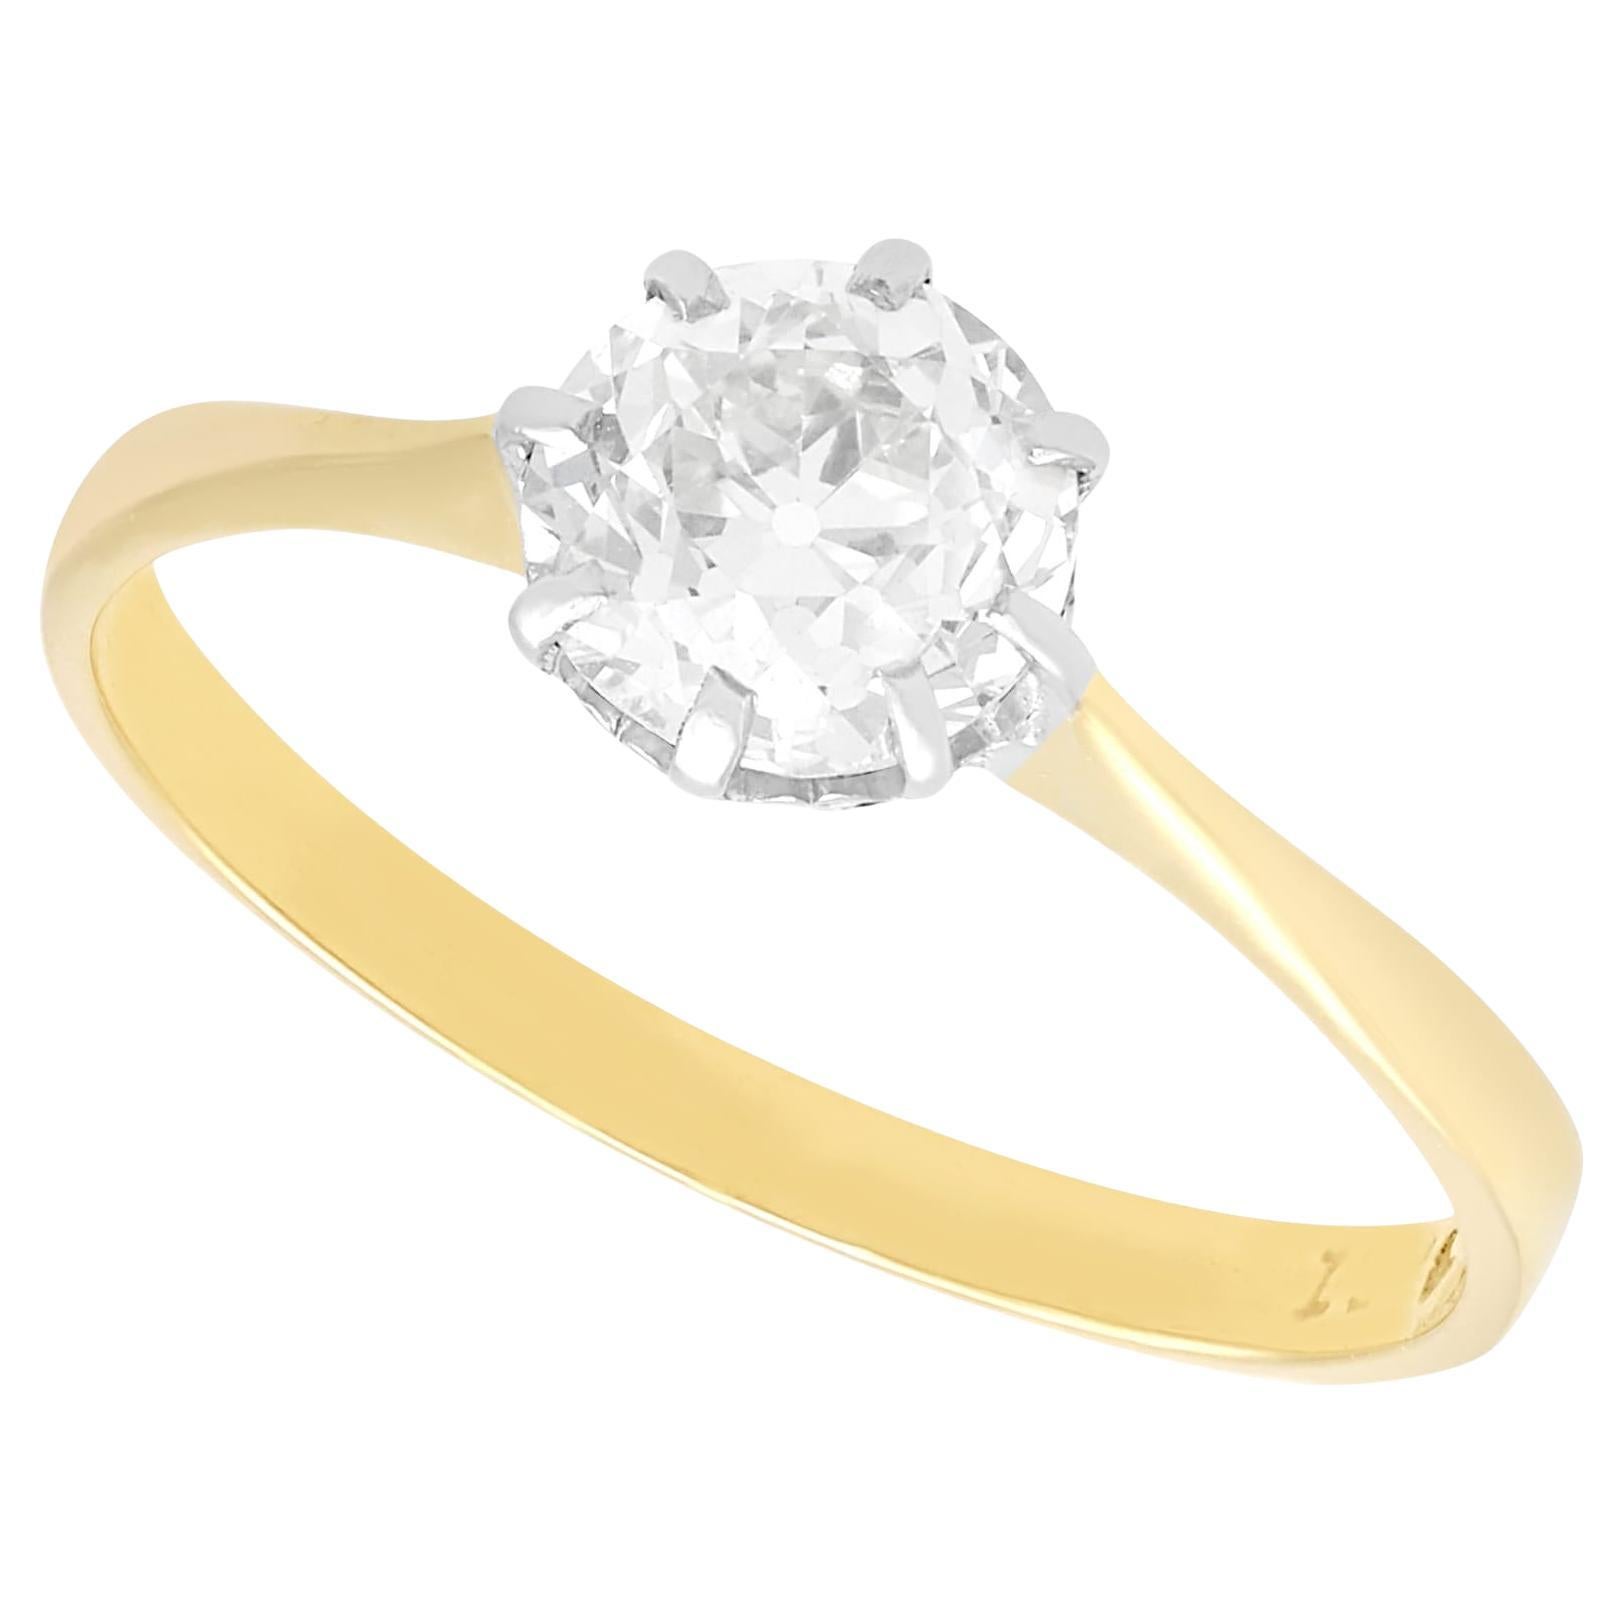 Antique 1.05Ct Diamond and 18k Yellow Gold Solitaire Ring Circa 1900 For Sale